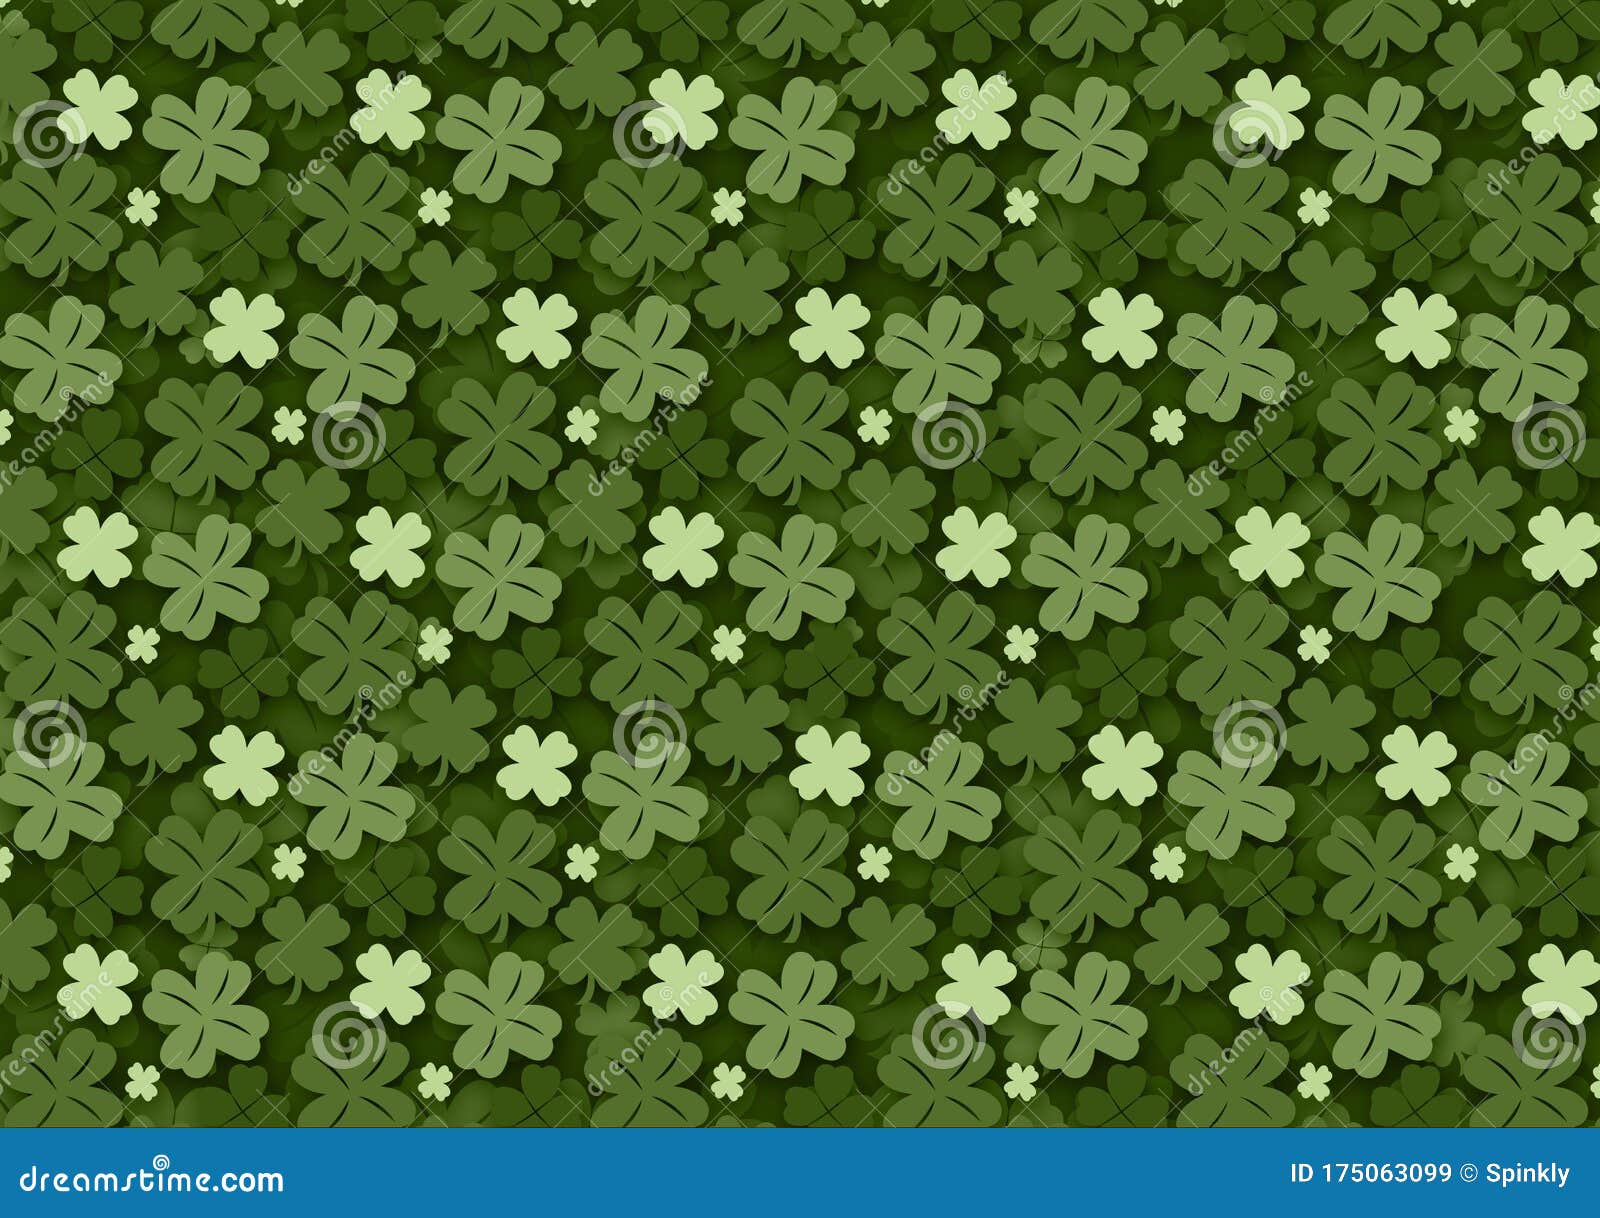 Lucky Cat and Green Hat on St Patricks Day 2K wallpaper download